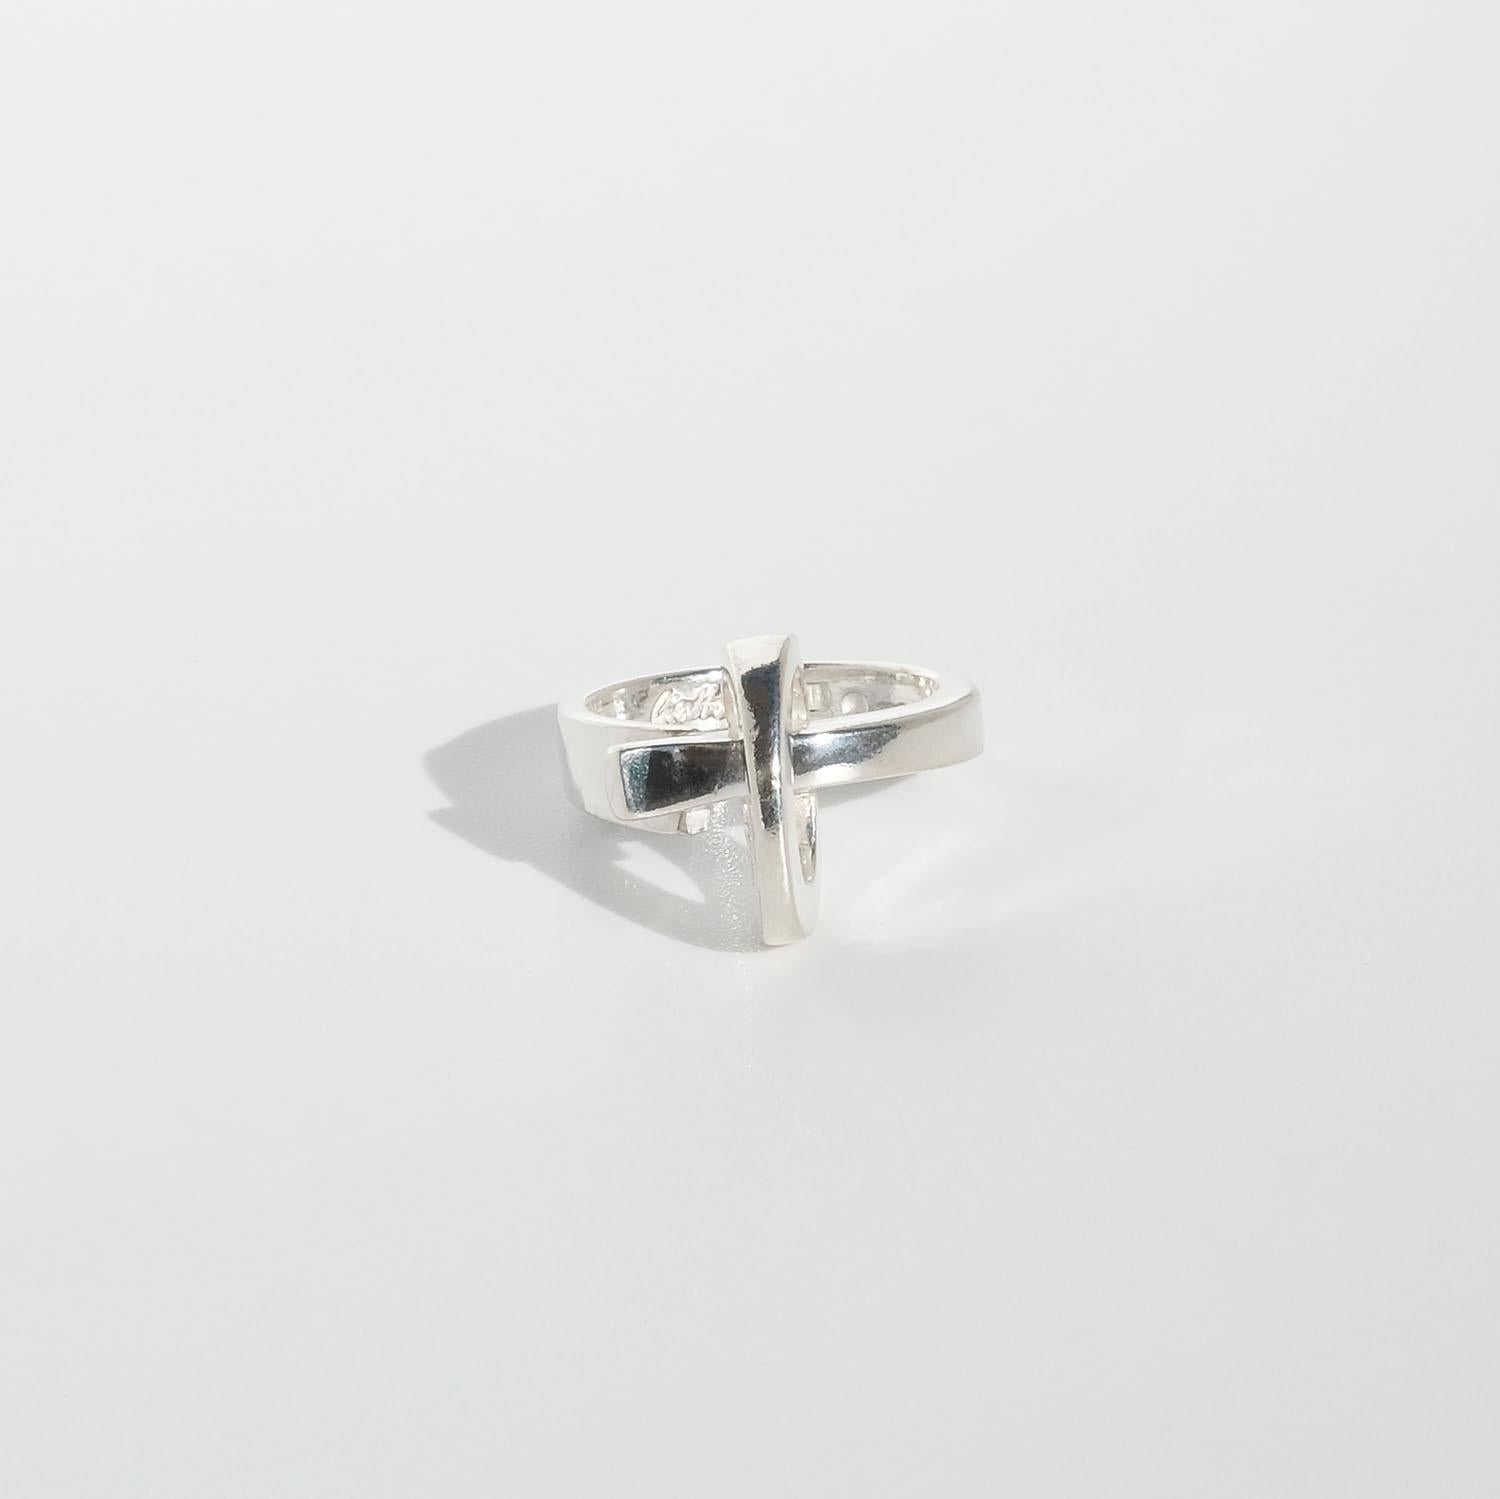 This joyful sterling silver ring has a silver creation on top and a asymmetrical shank.

The ring will fit well in both an everyday environment as well as in a more festive one. This is what we would call a day to day ring.

Do you know that Claës